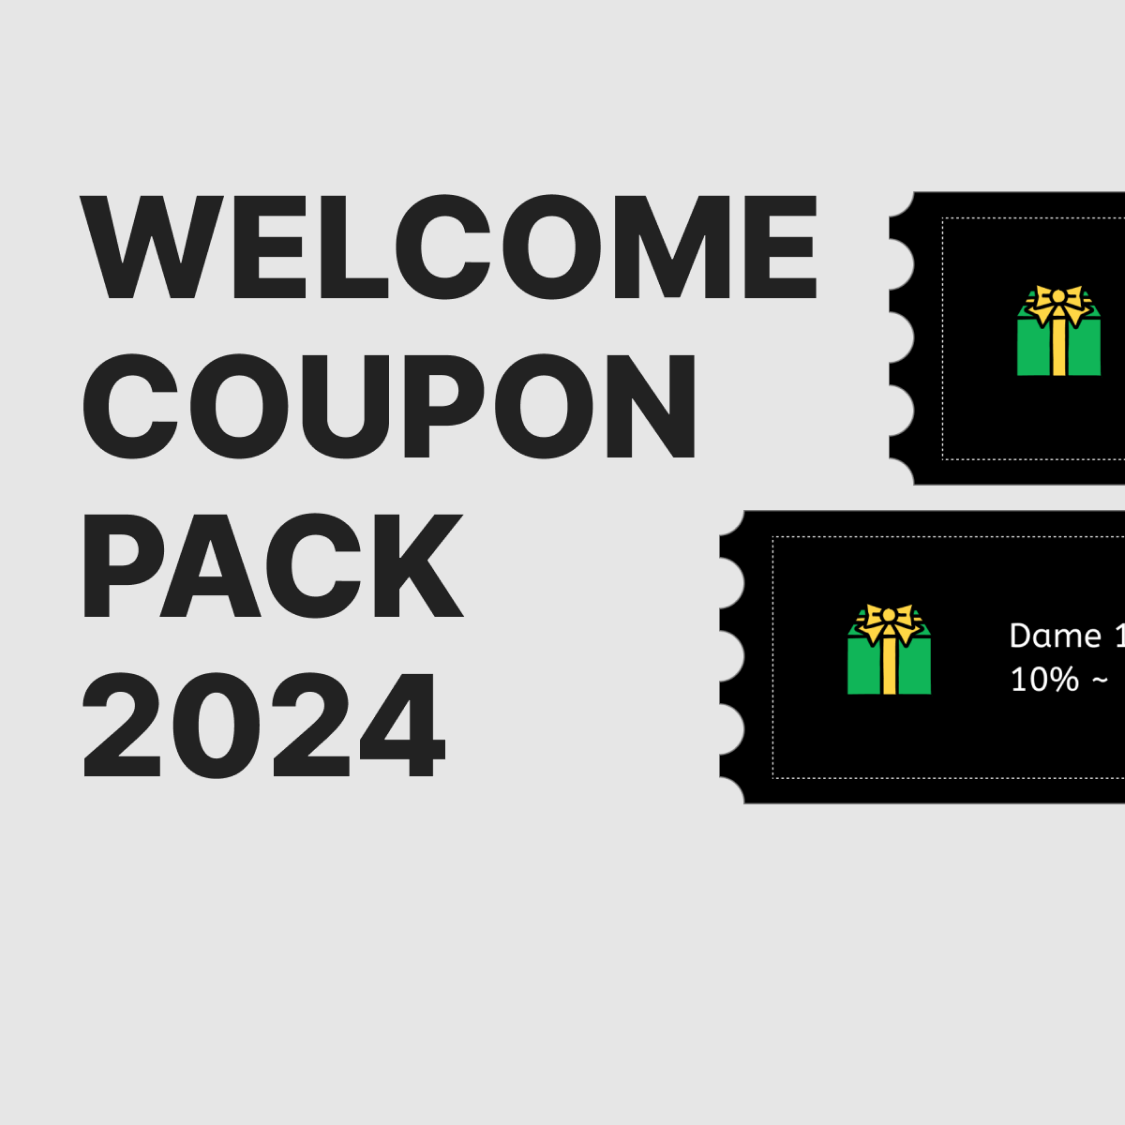 WELCOME COUPON PACK 2024